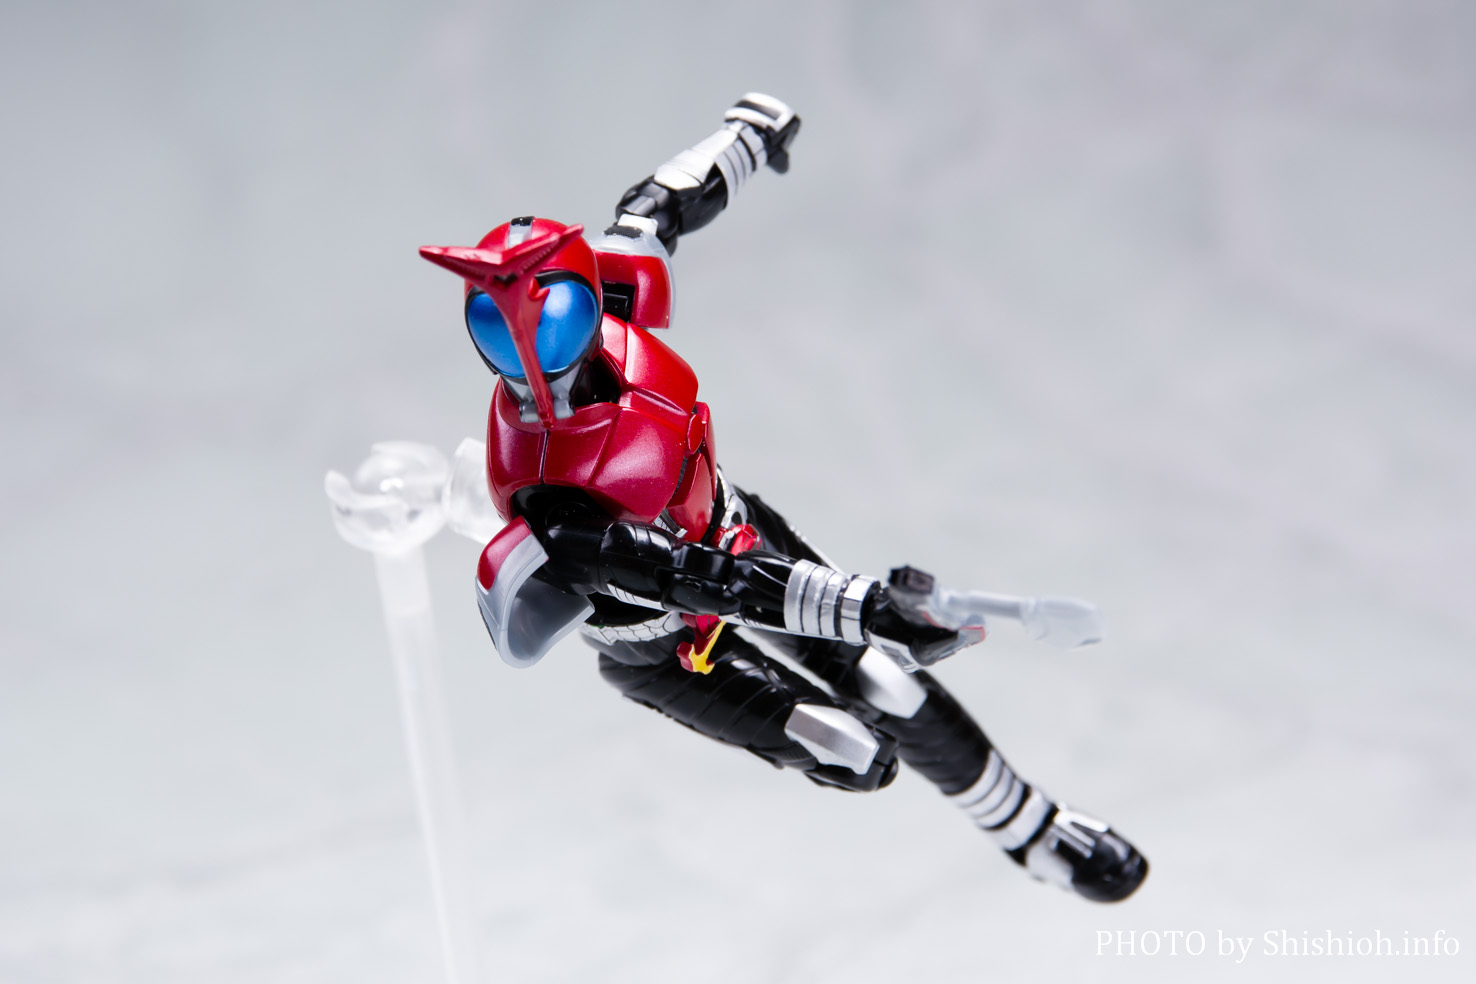 SO-DO CHRONICLE 仮面ライダーカブト